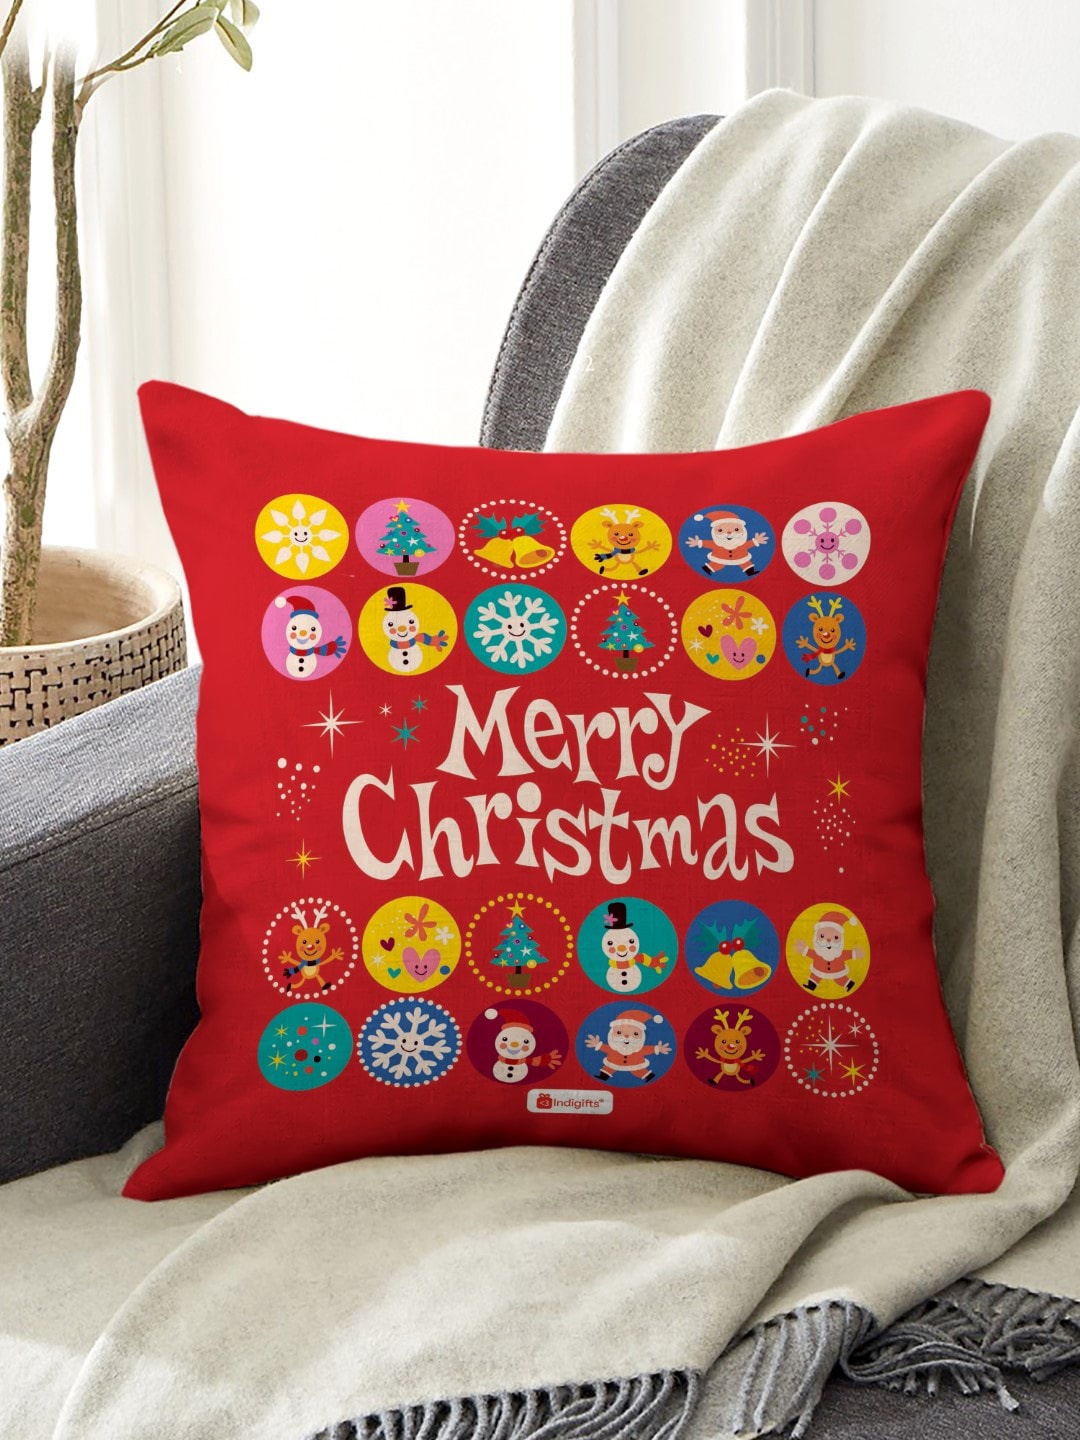 

Indigifts Red Merry Christmas Printed Cushion Cover With Filler